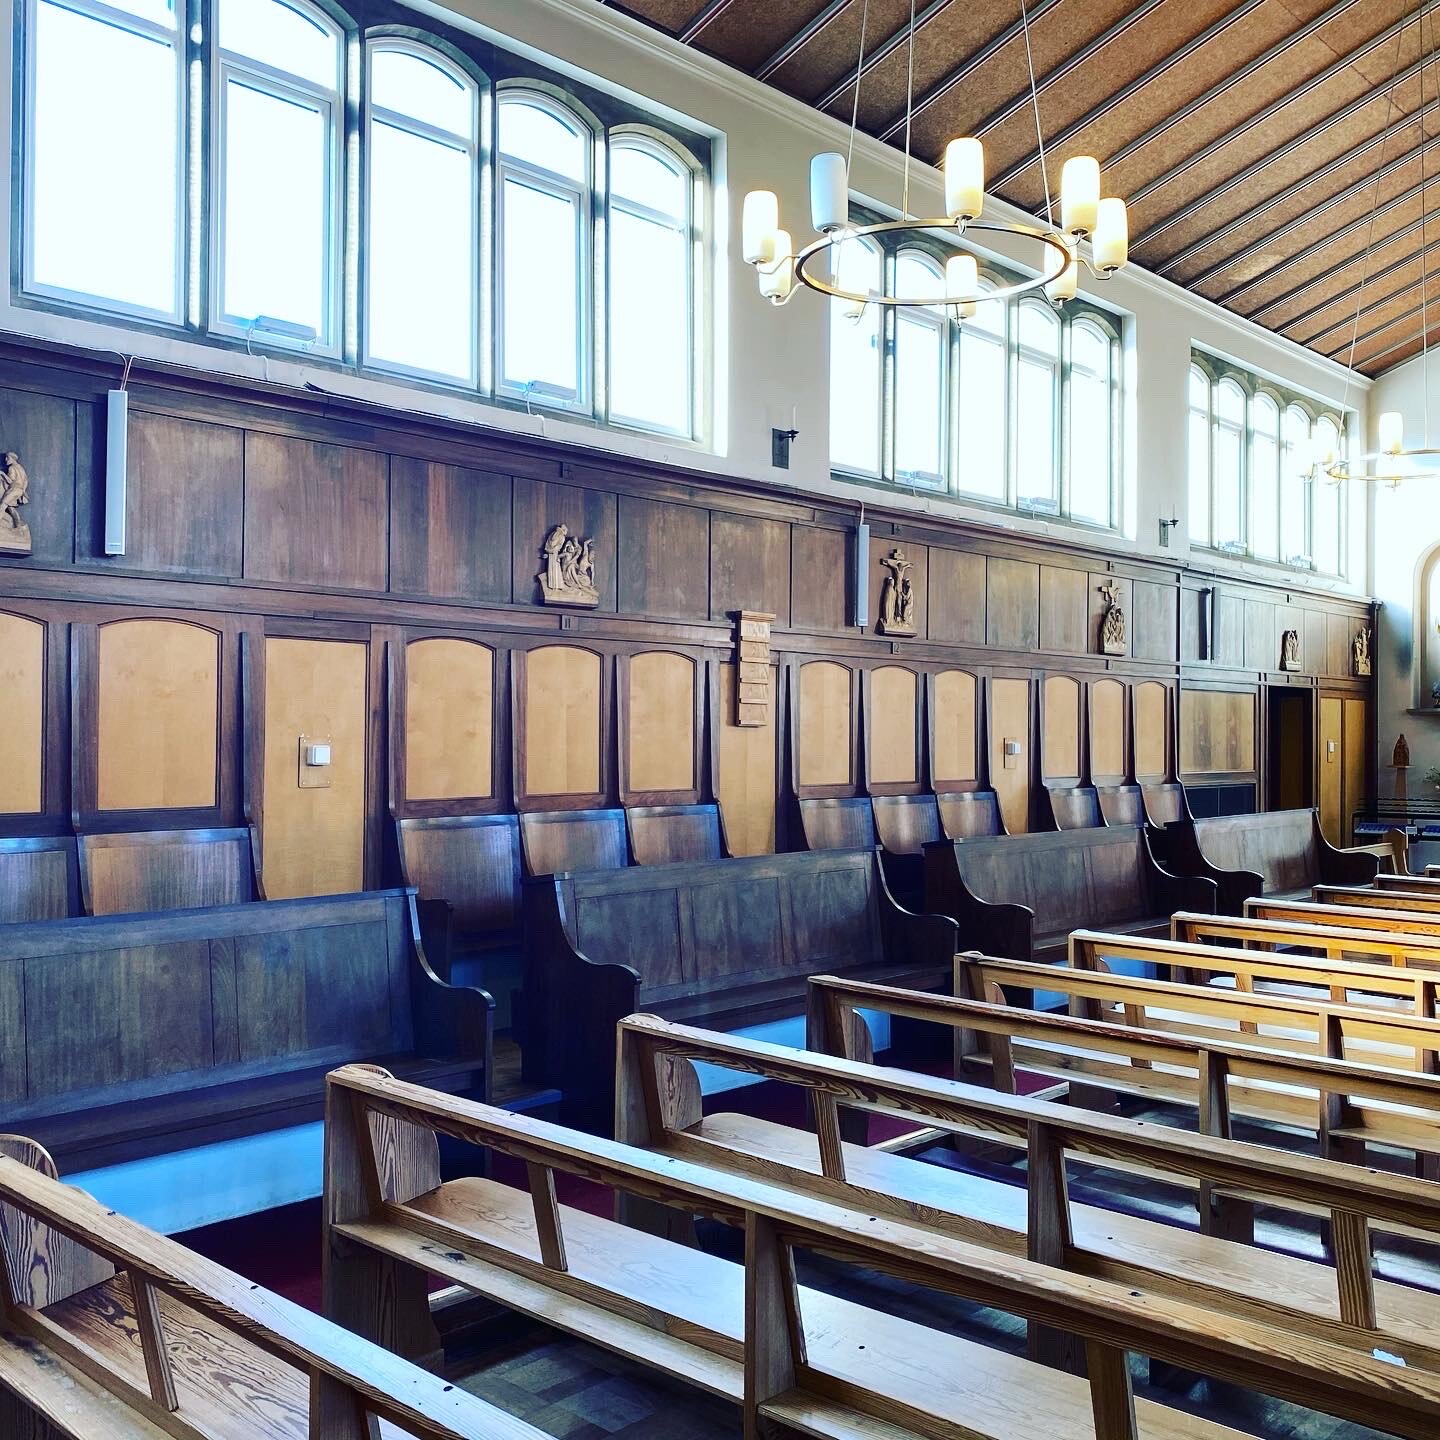 Interior of a modern church with new wood panelling